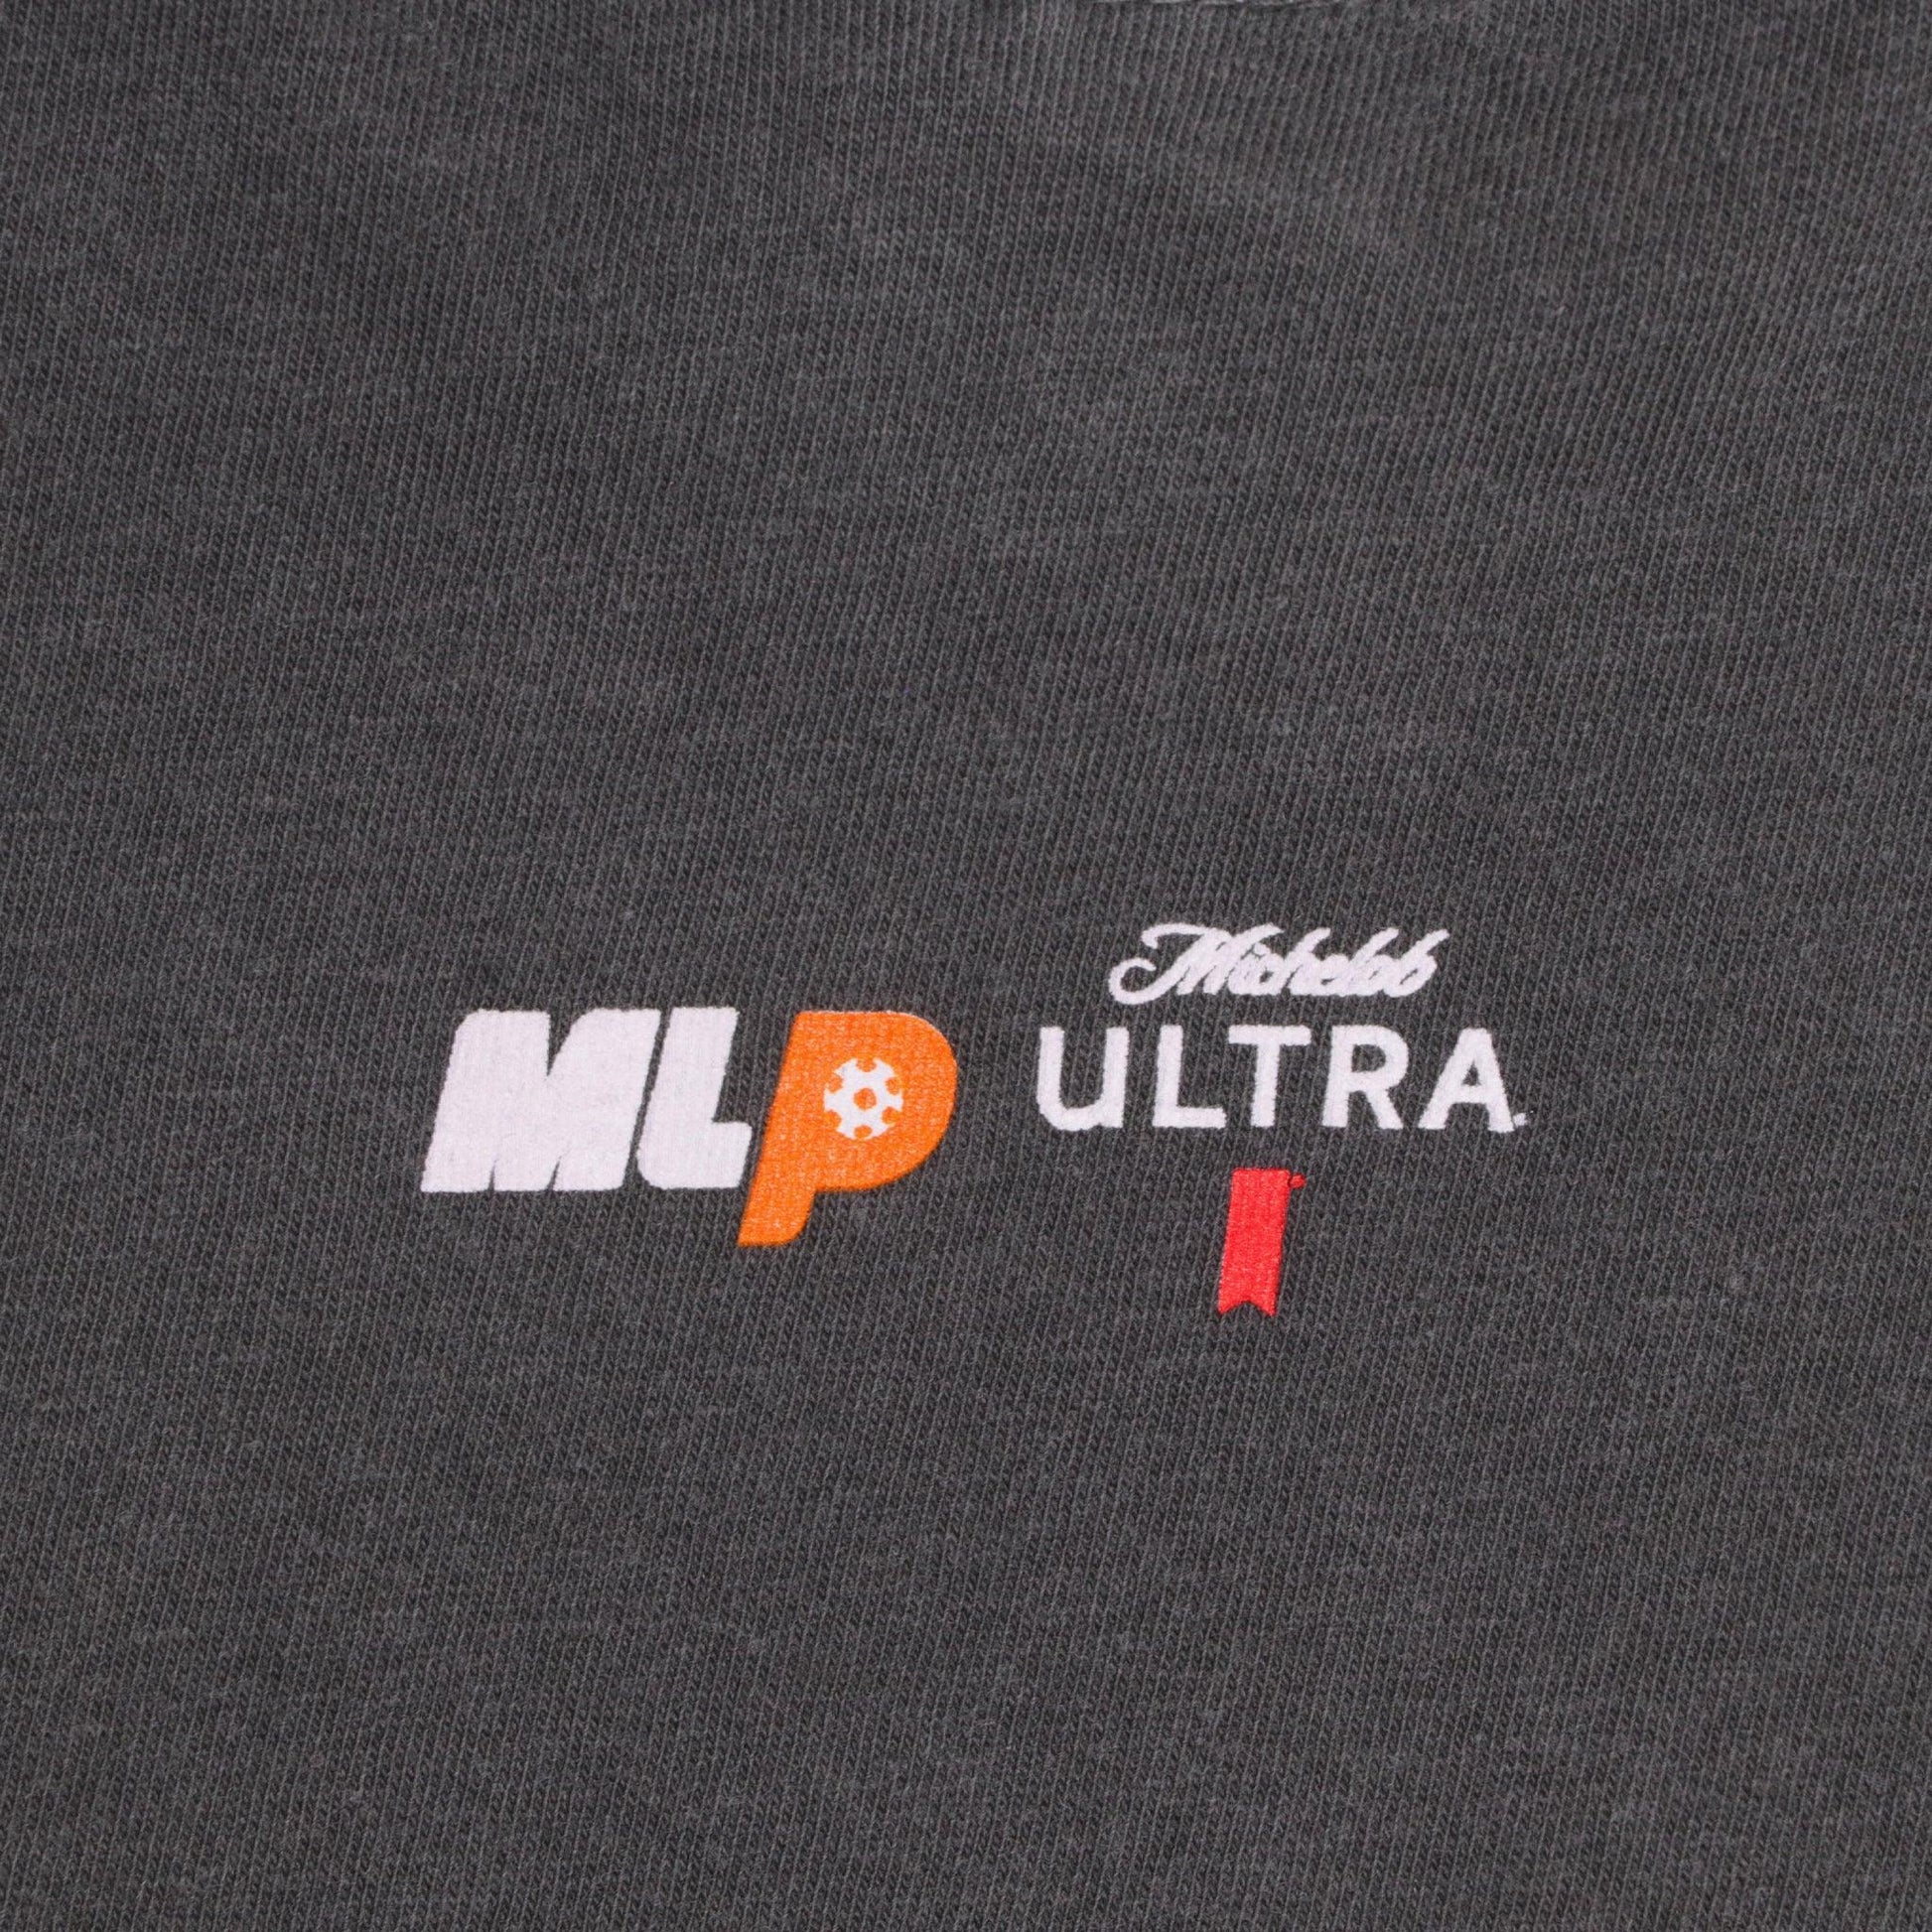 detail of MLP and Michelob ULTRA logo 